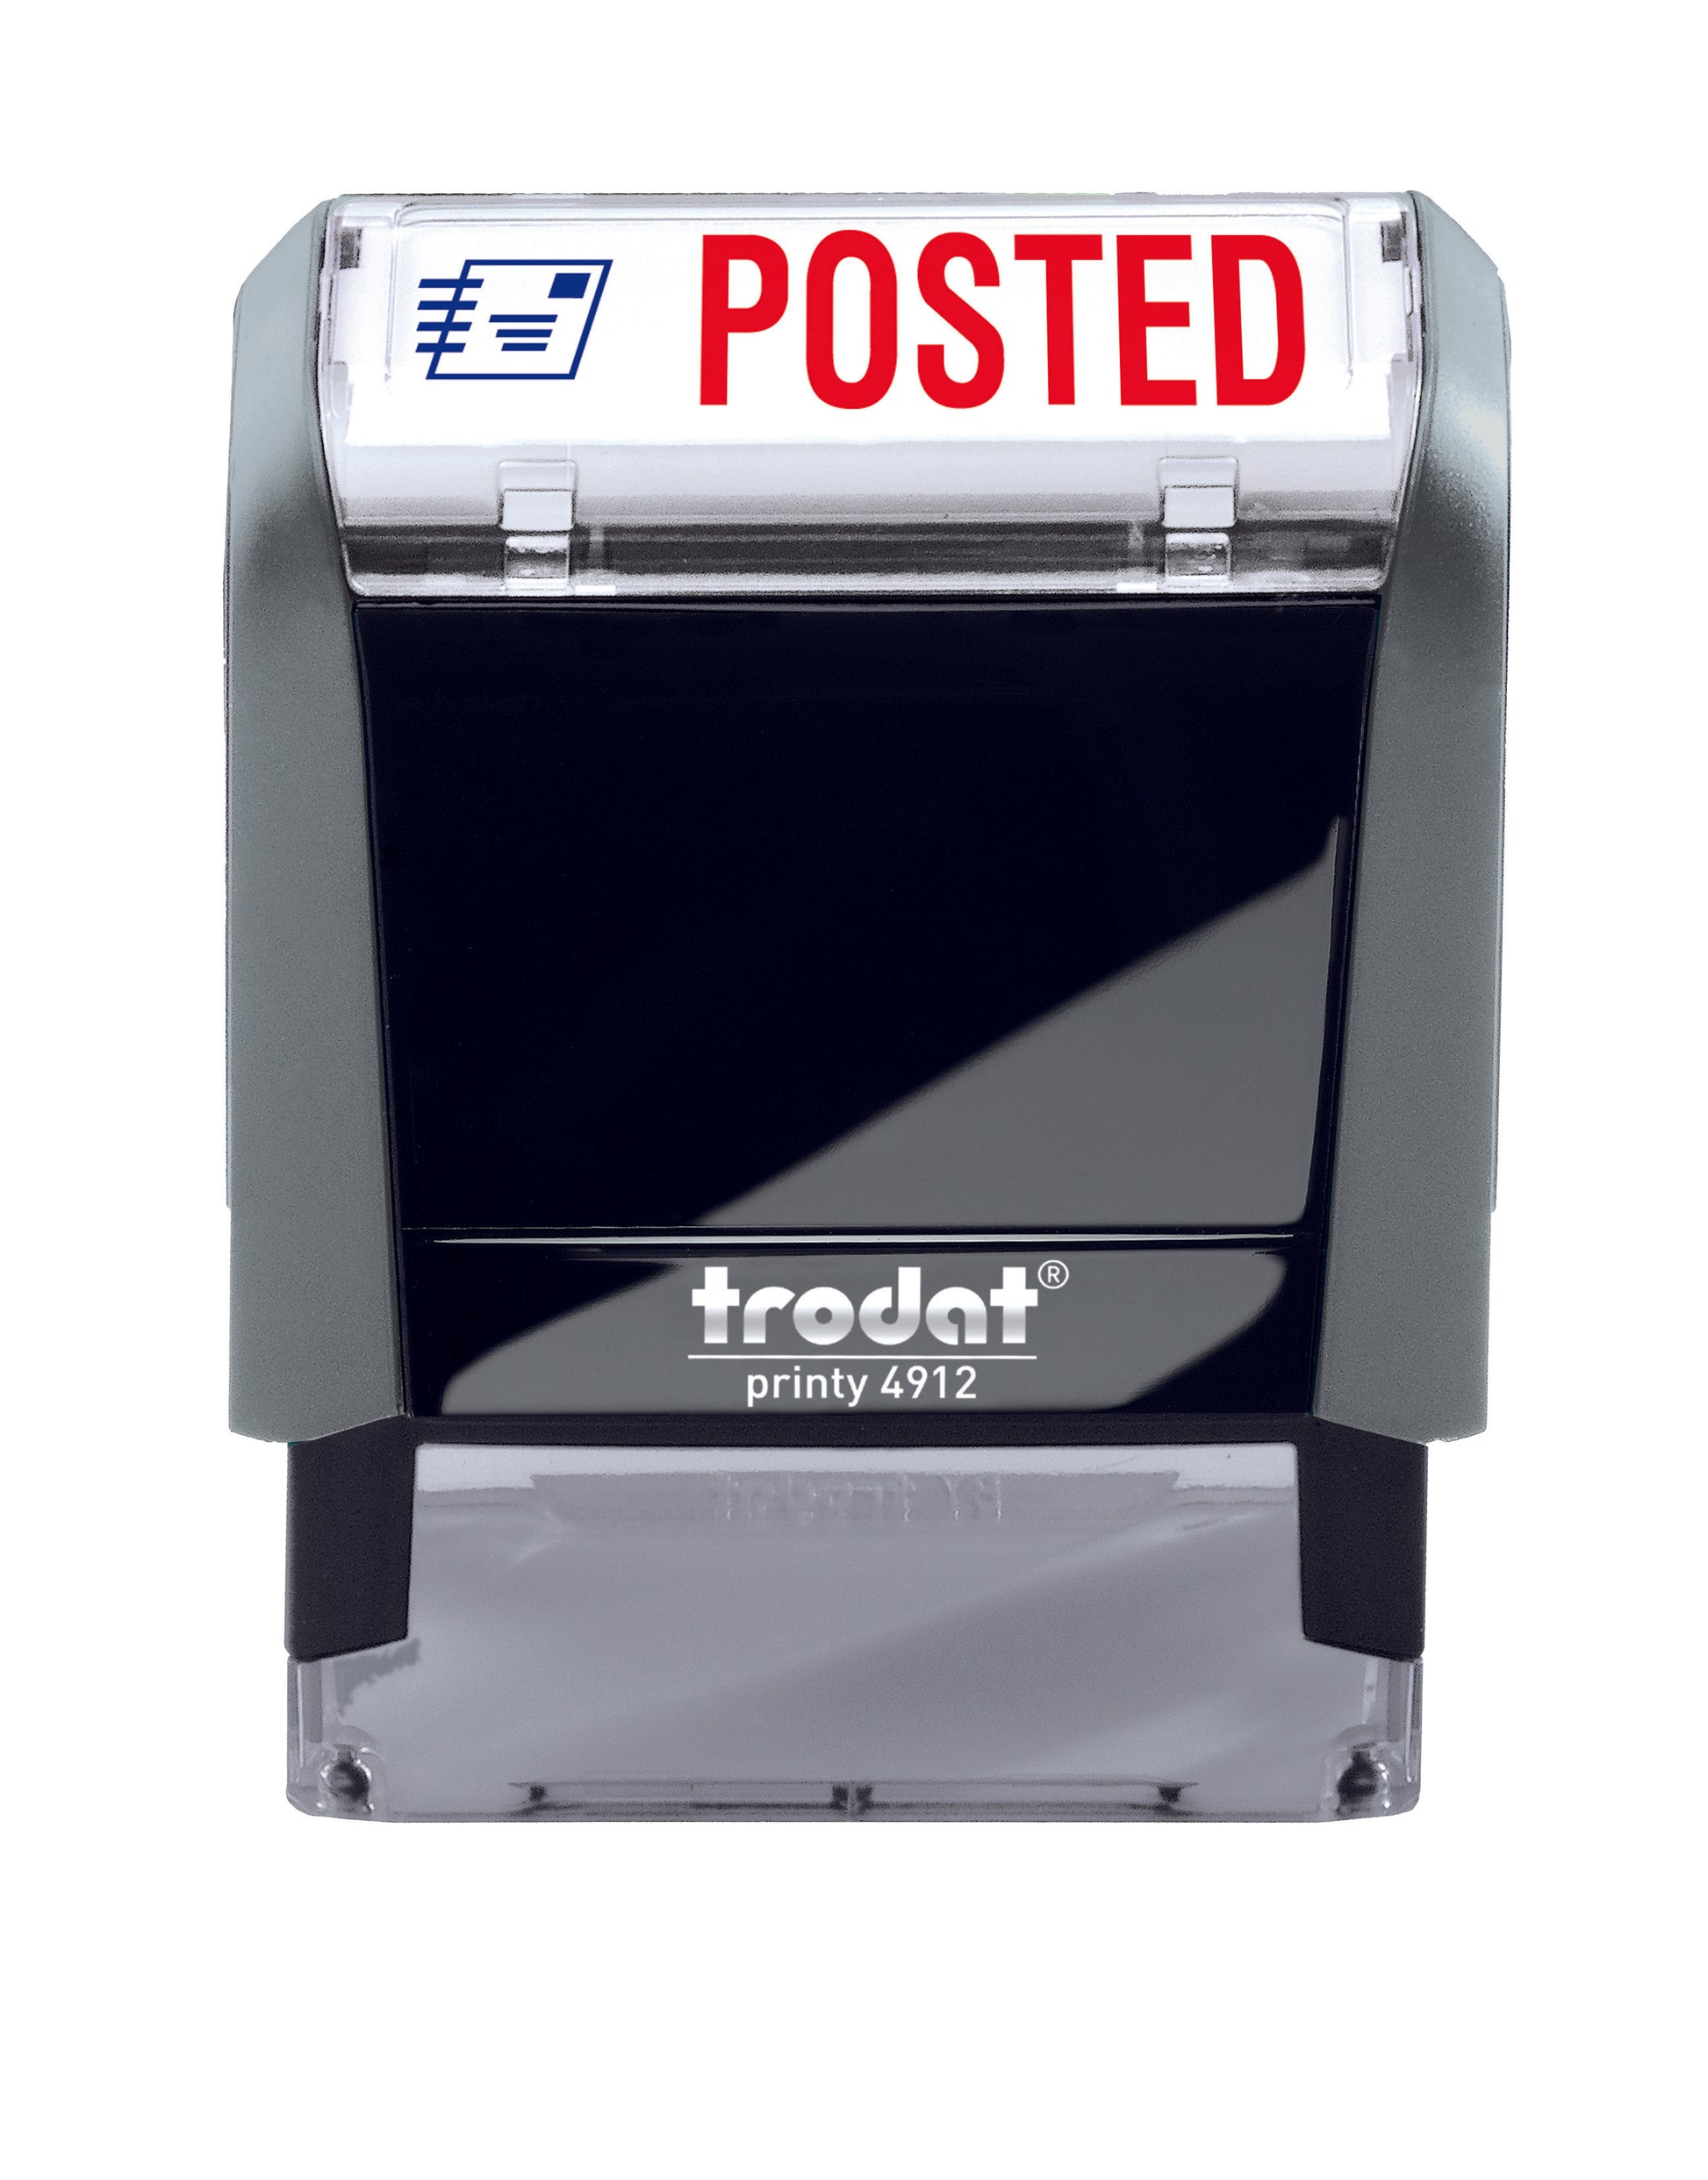 Trodat POSTED Ideal 4912 Custom Self-Inking Rubber Stamp